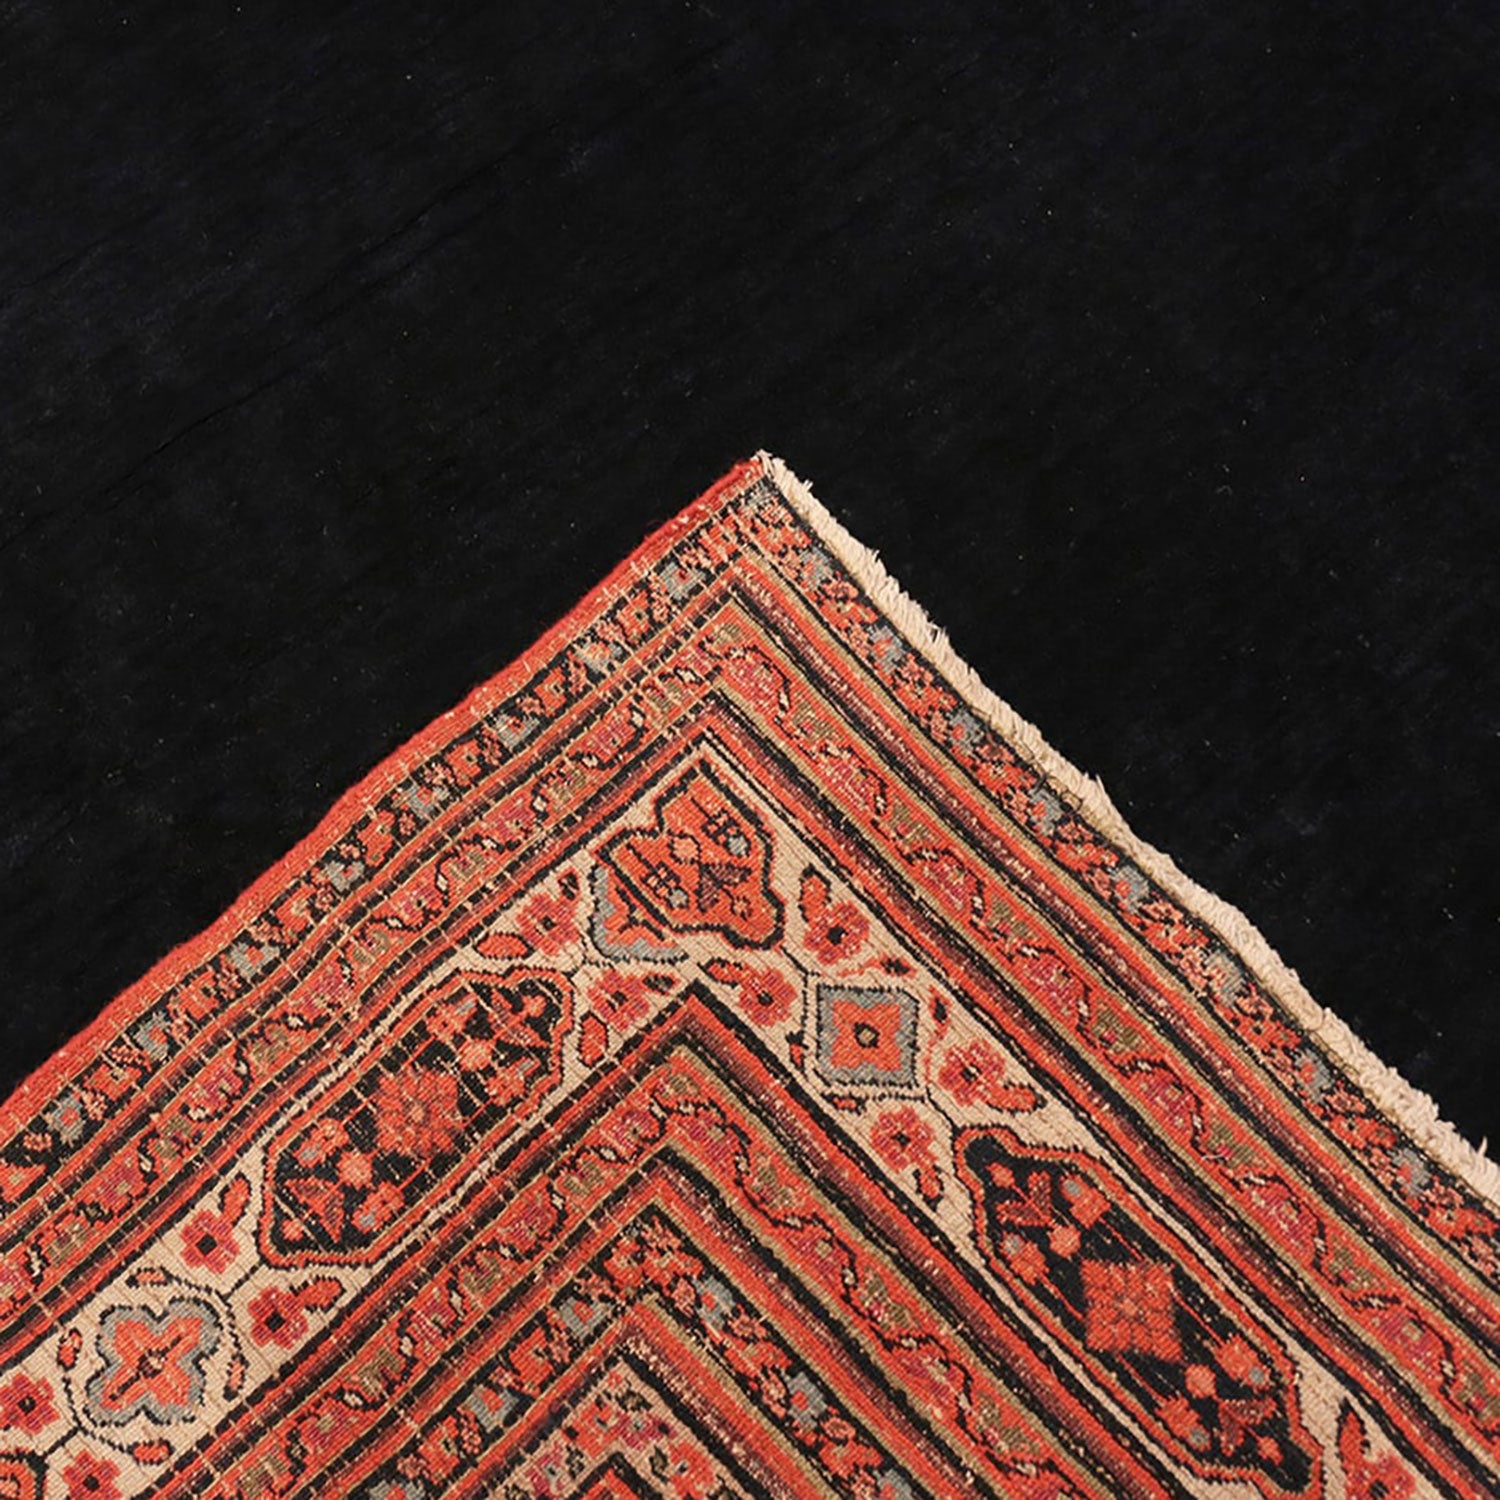 Close-up of a meticulously crafted Persian rug on dark flooring.